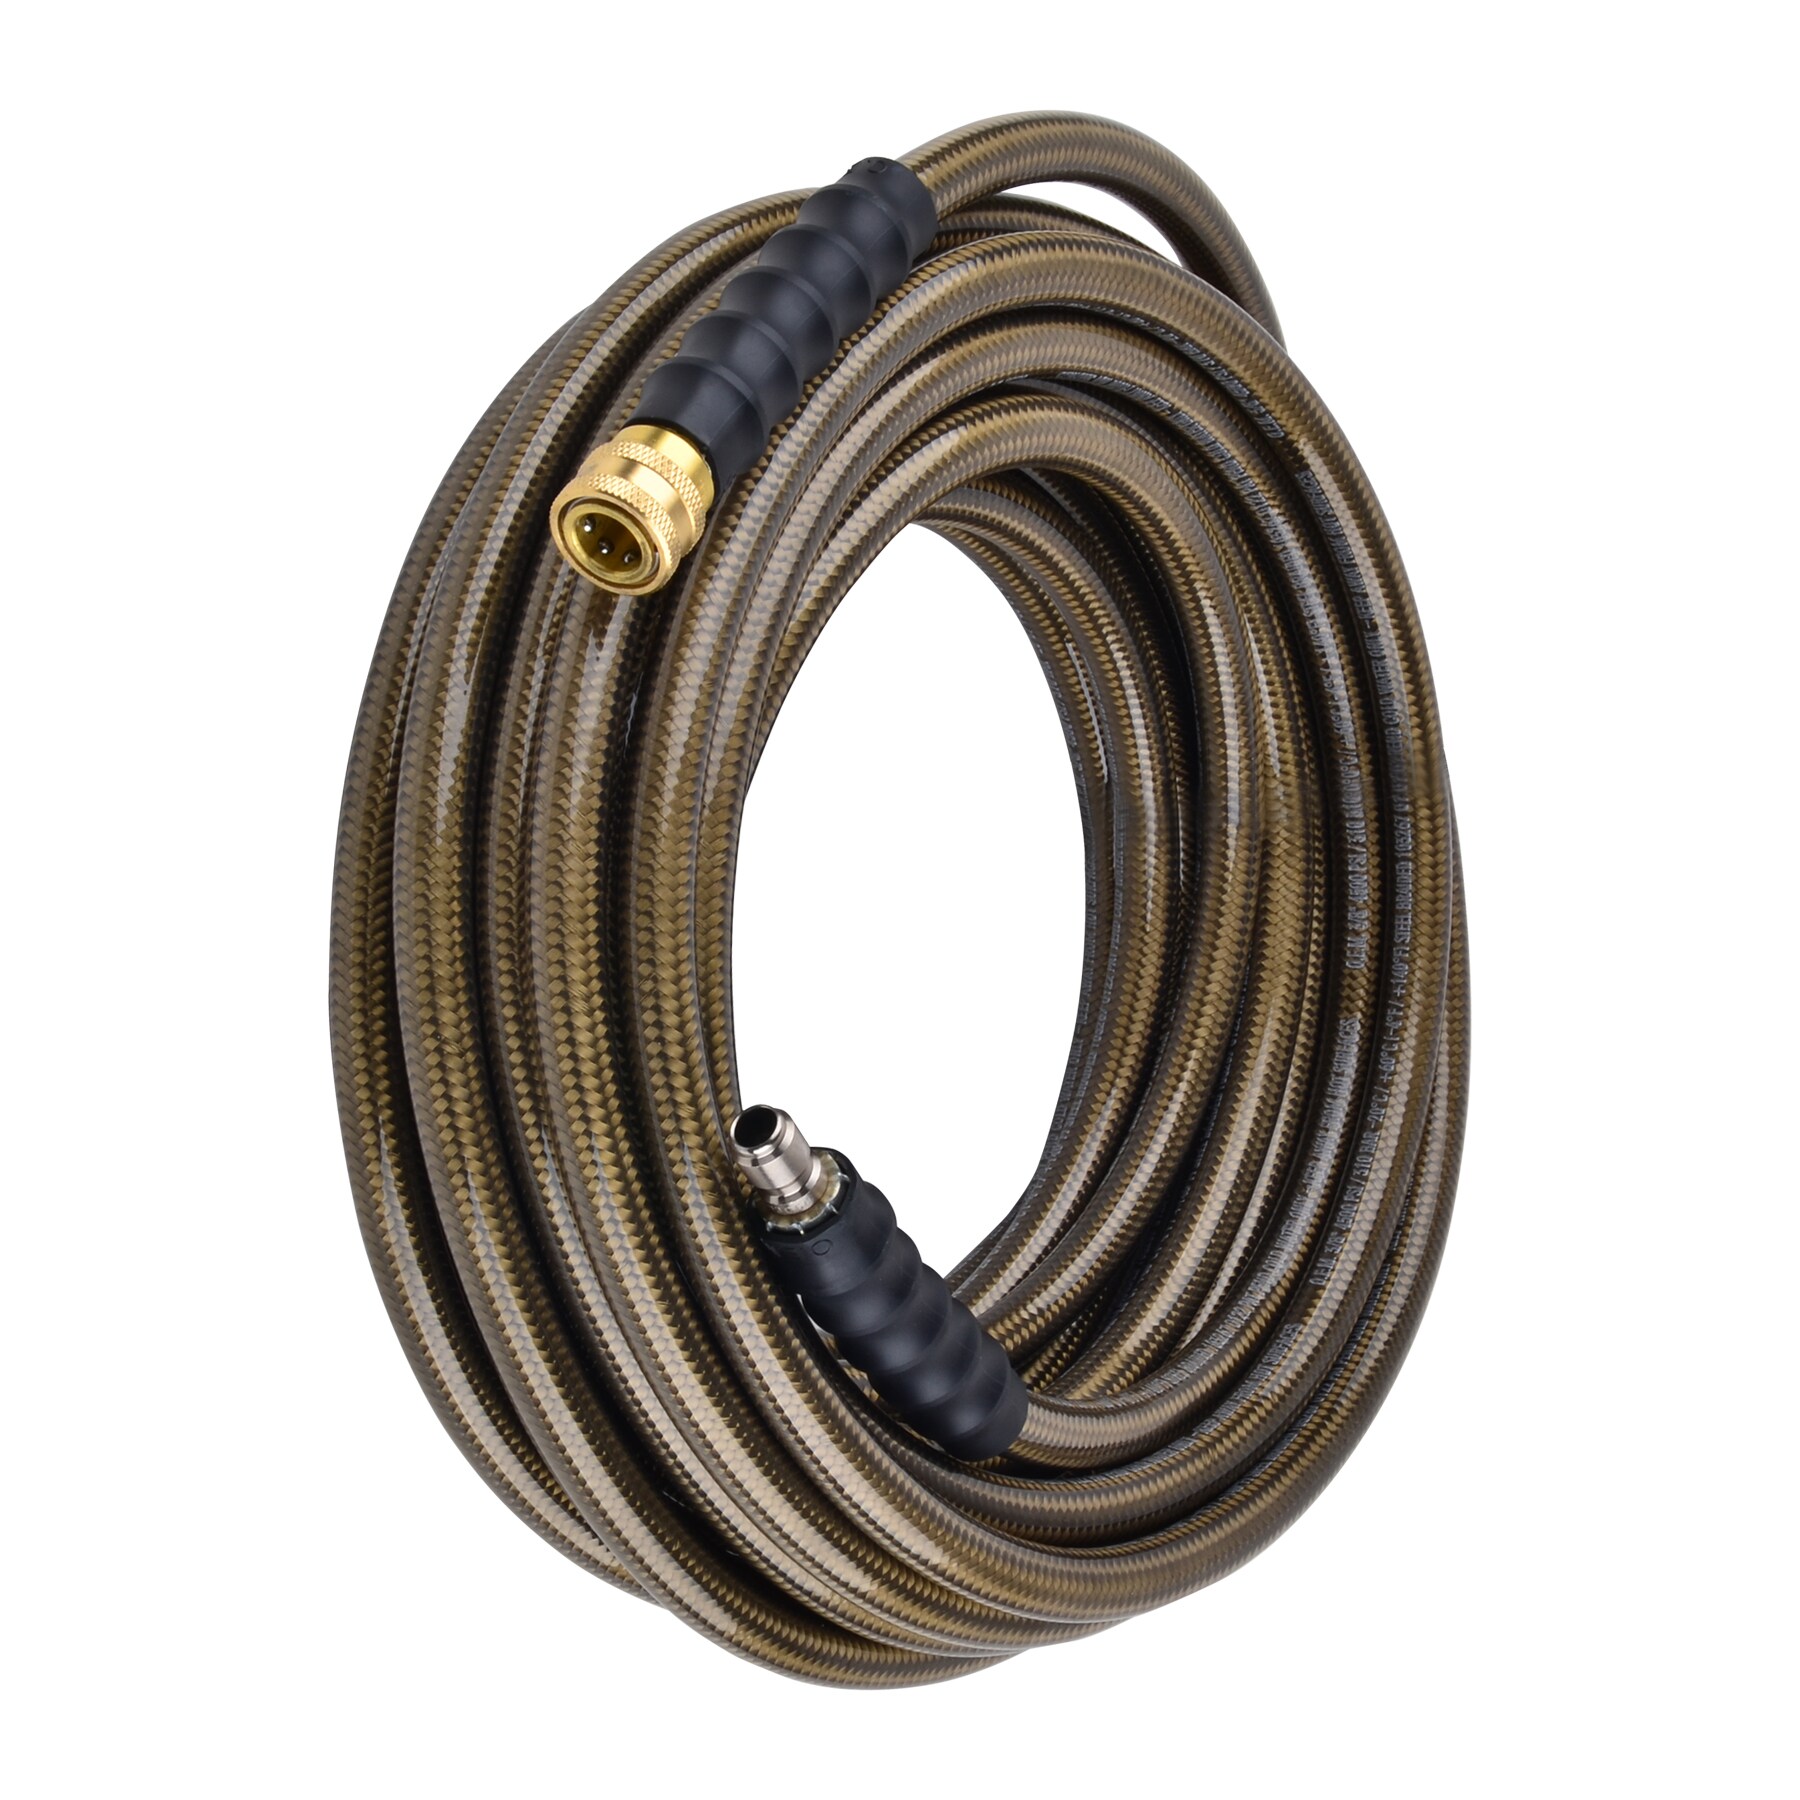 Pressure Washer Replacement Hose Pressure Washers & Accessories at